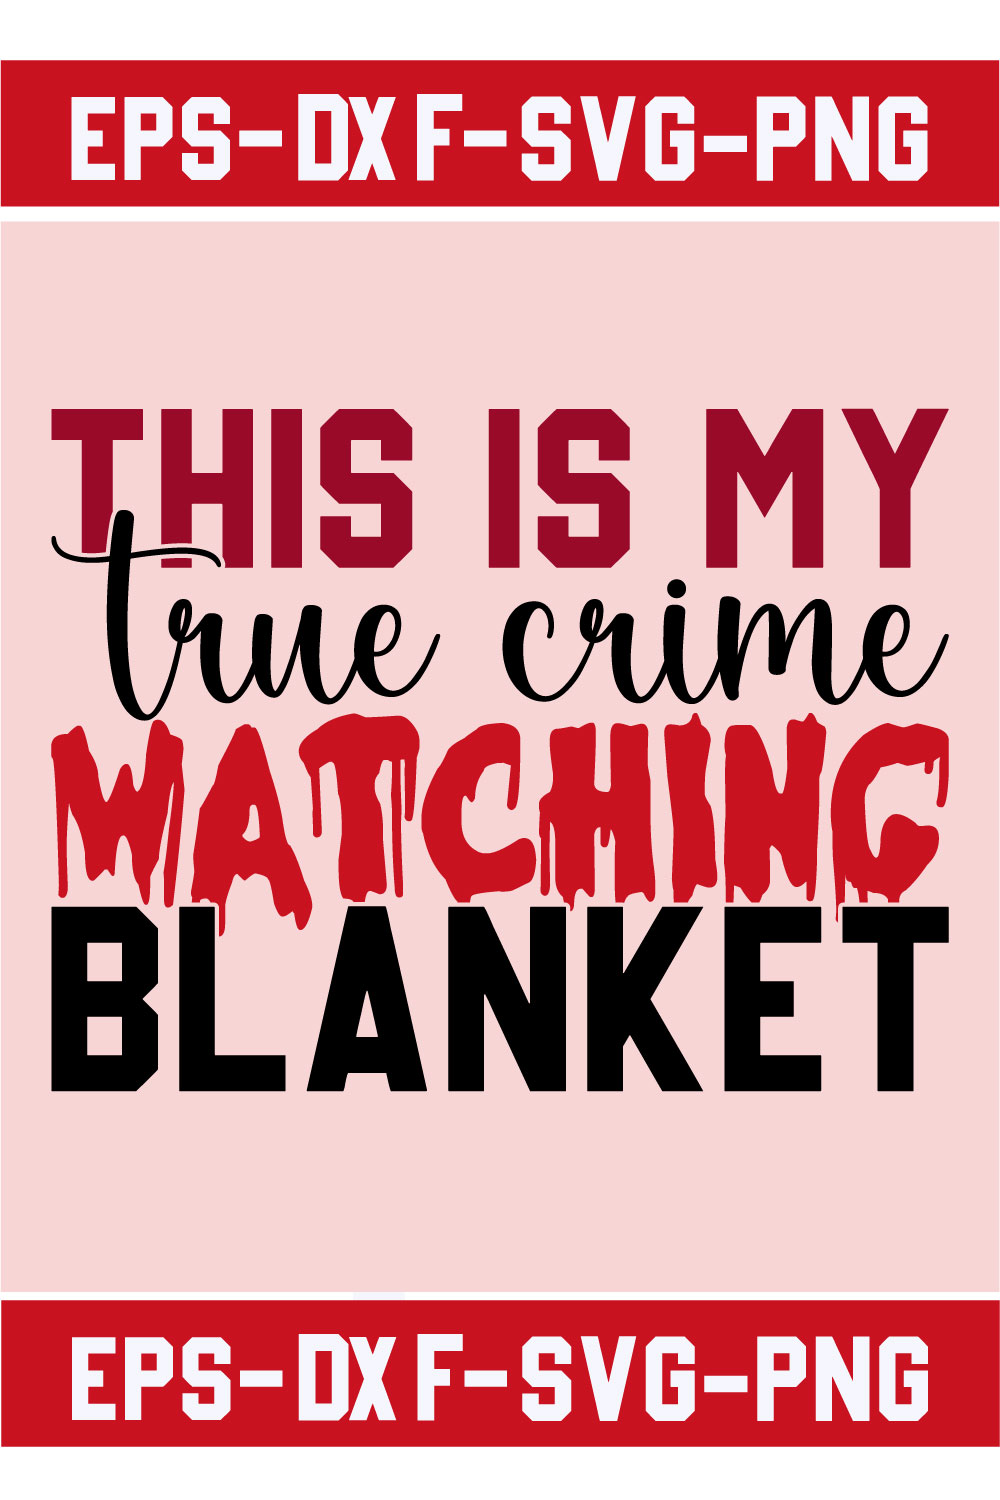 This is my true crime watching blanket pinterest preview image.